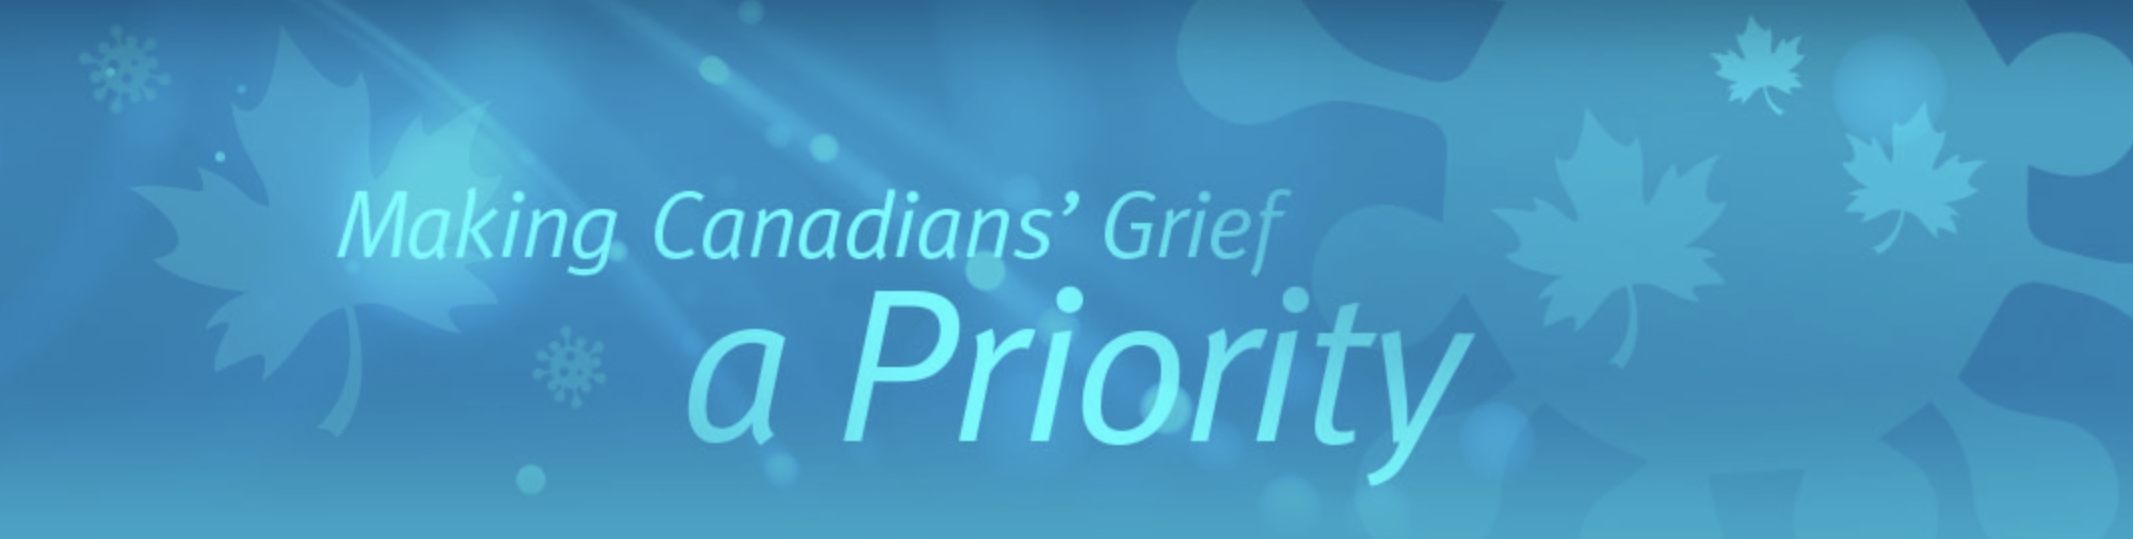 Making Canadians' Grief a Priority